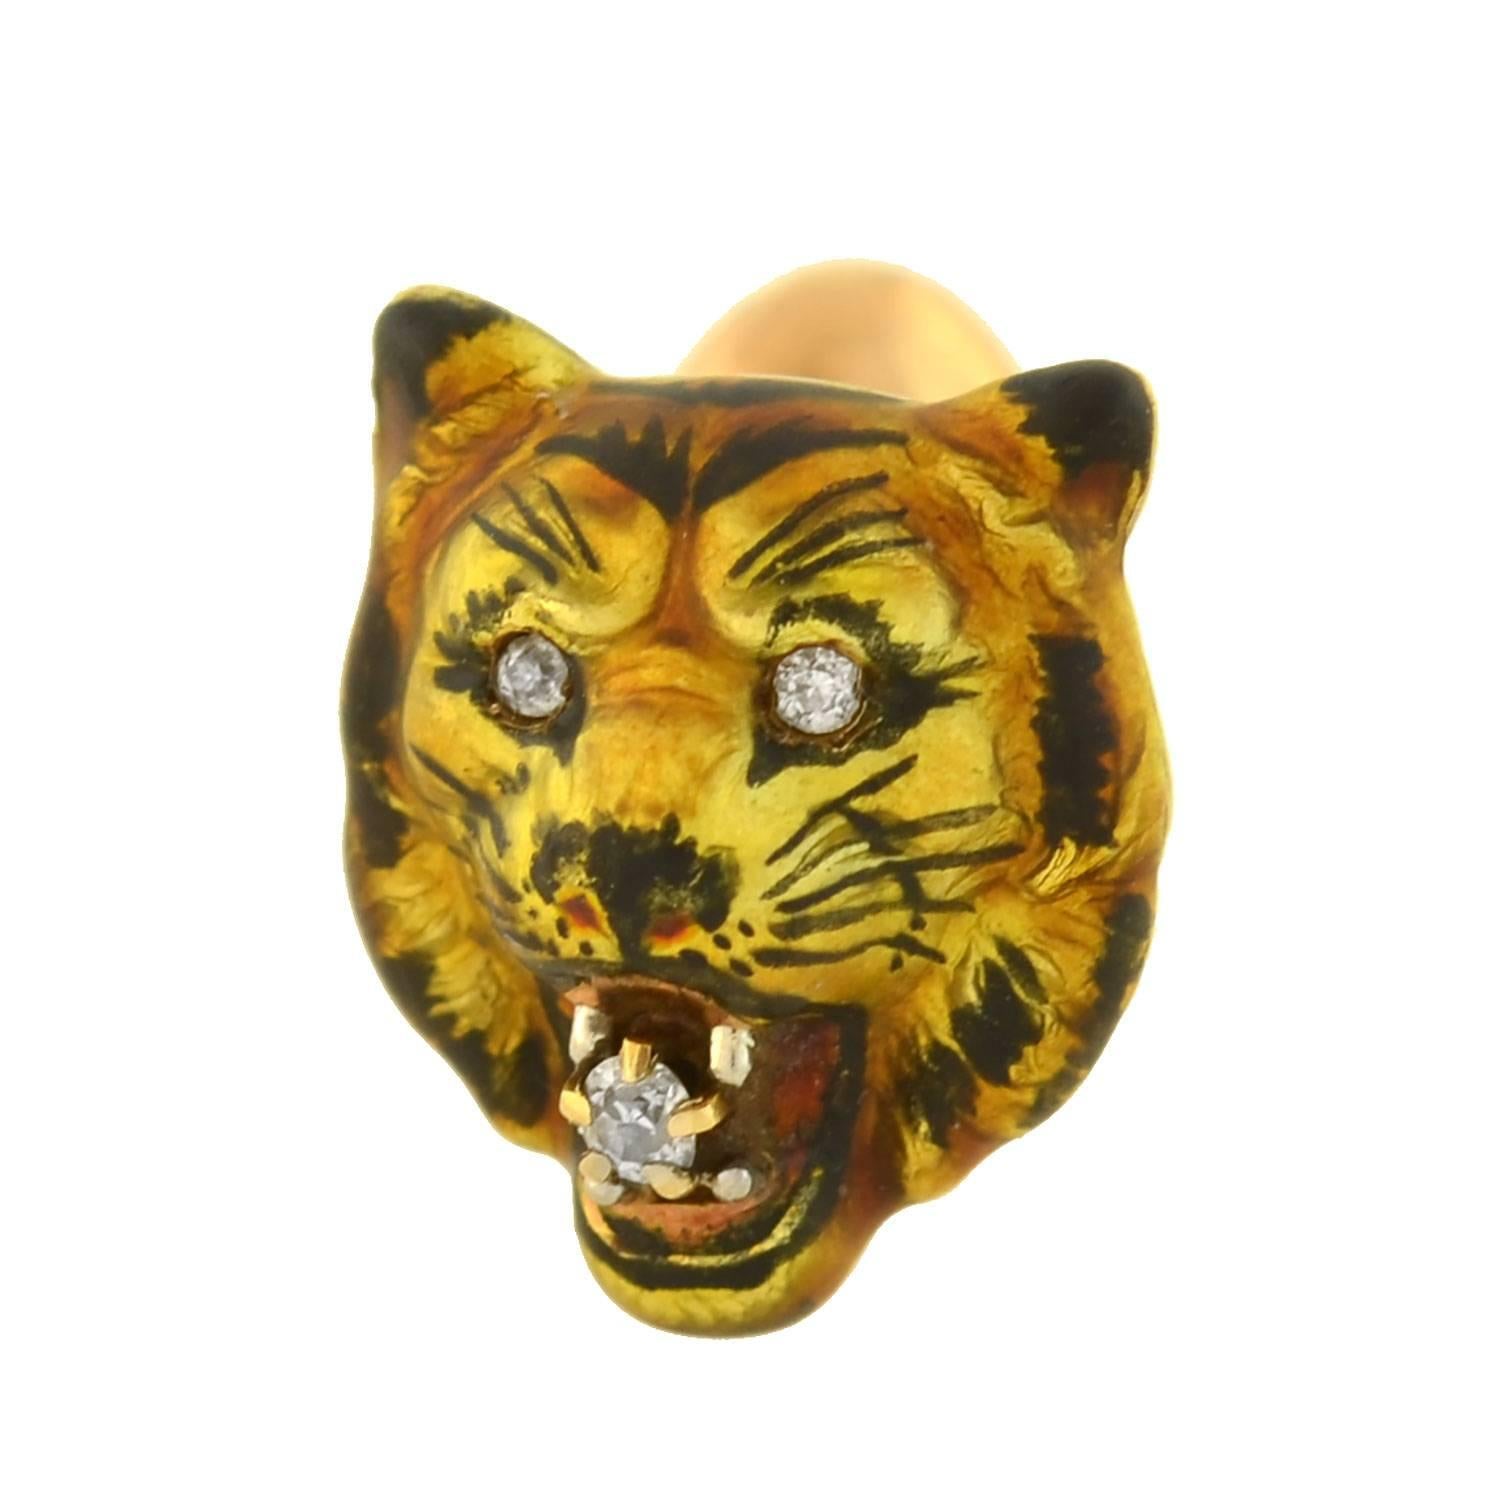 An exceptional pair of cufflinks from the Victorian (ca1880s) era! Crafted in 14kt yellow gold, each of these beautiful cufflinks depicts a single 3-dimensional tiger head detailed with colorful enameling and sparkling diamonds. The tigers have a